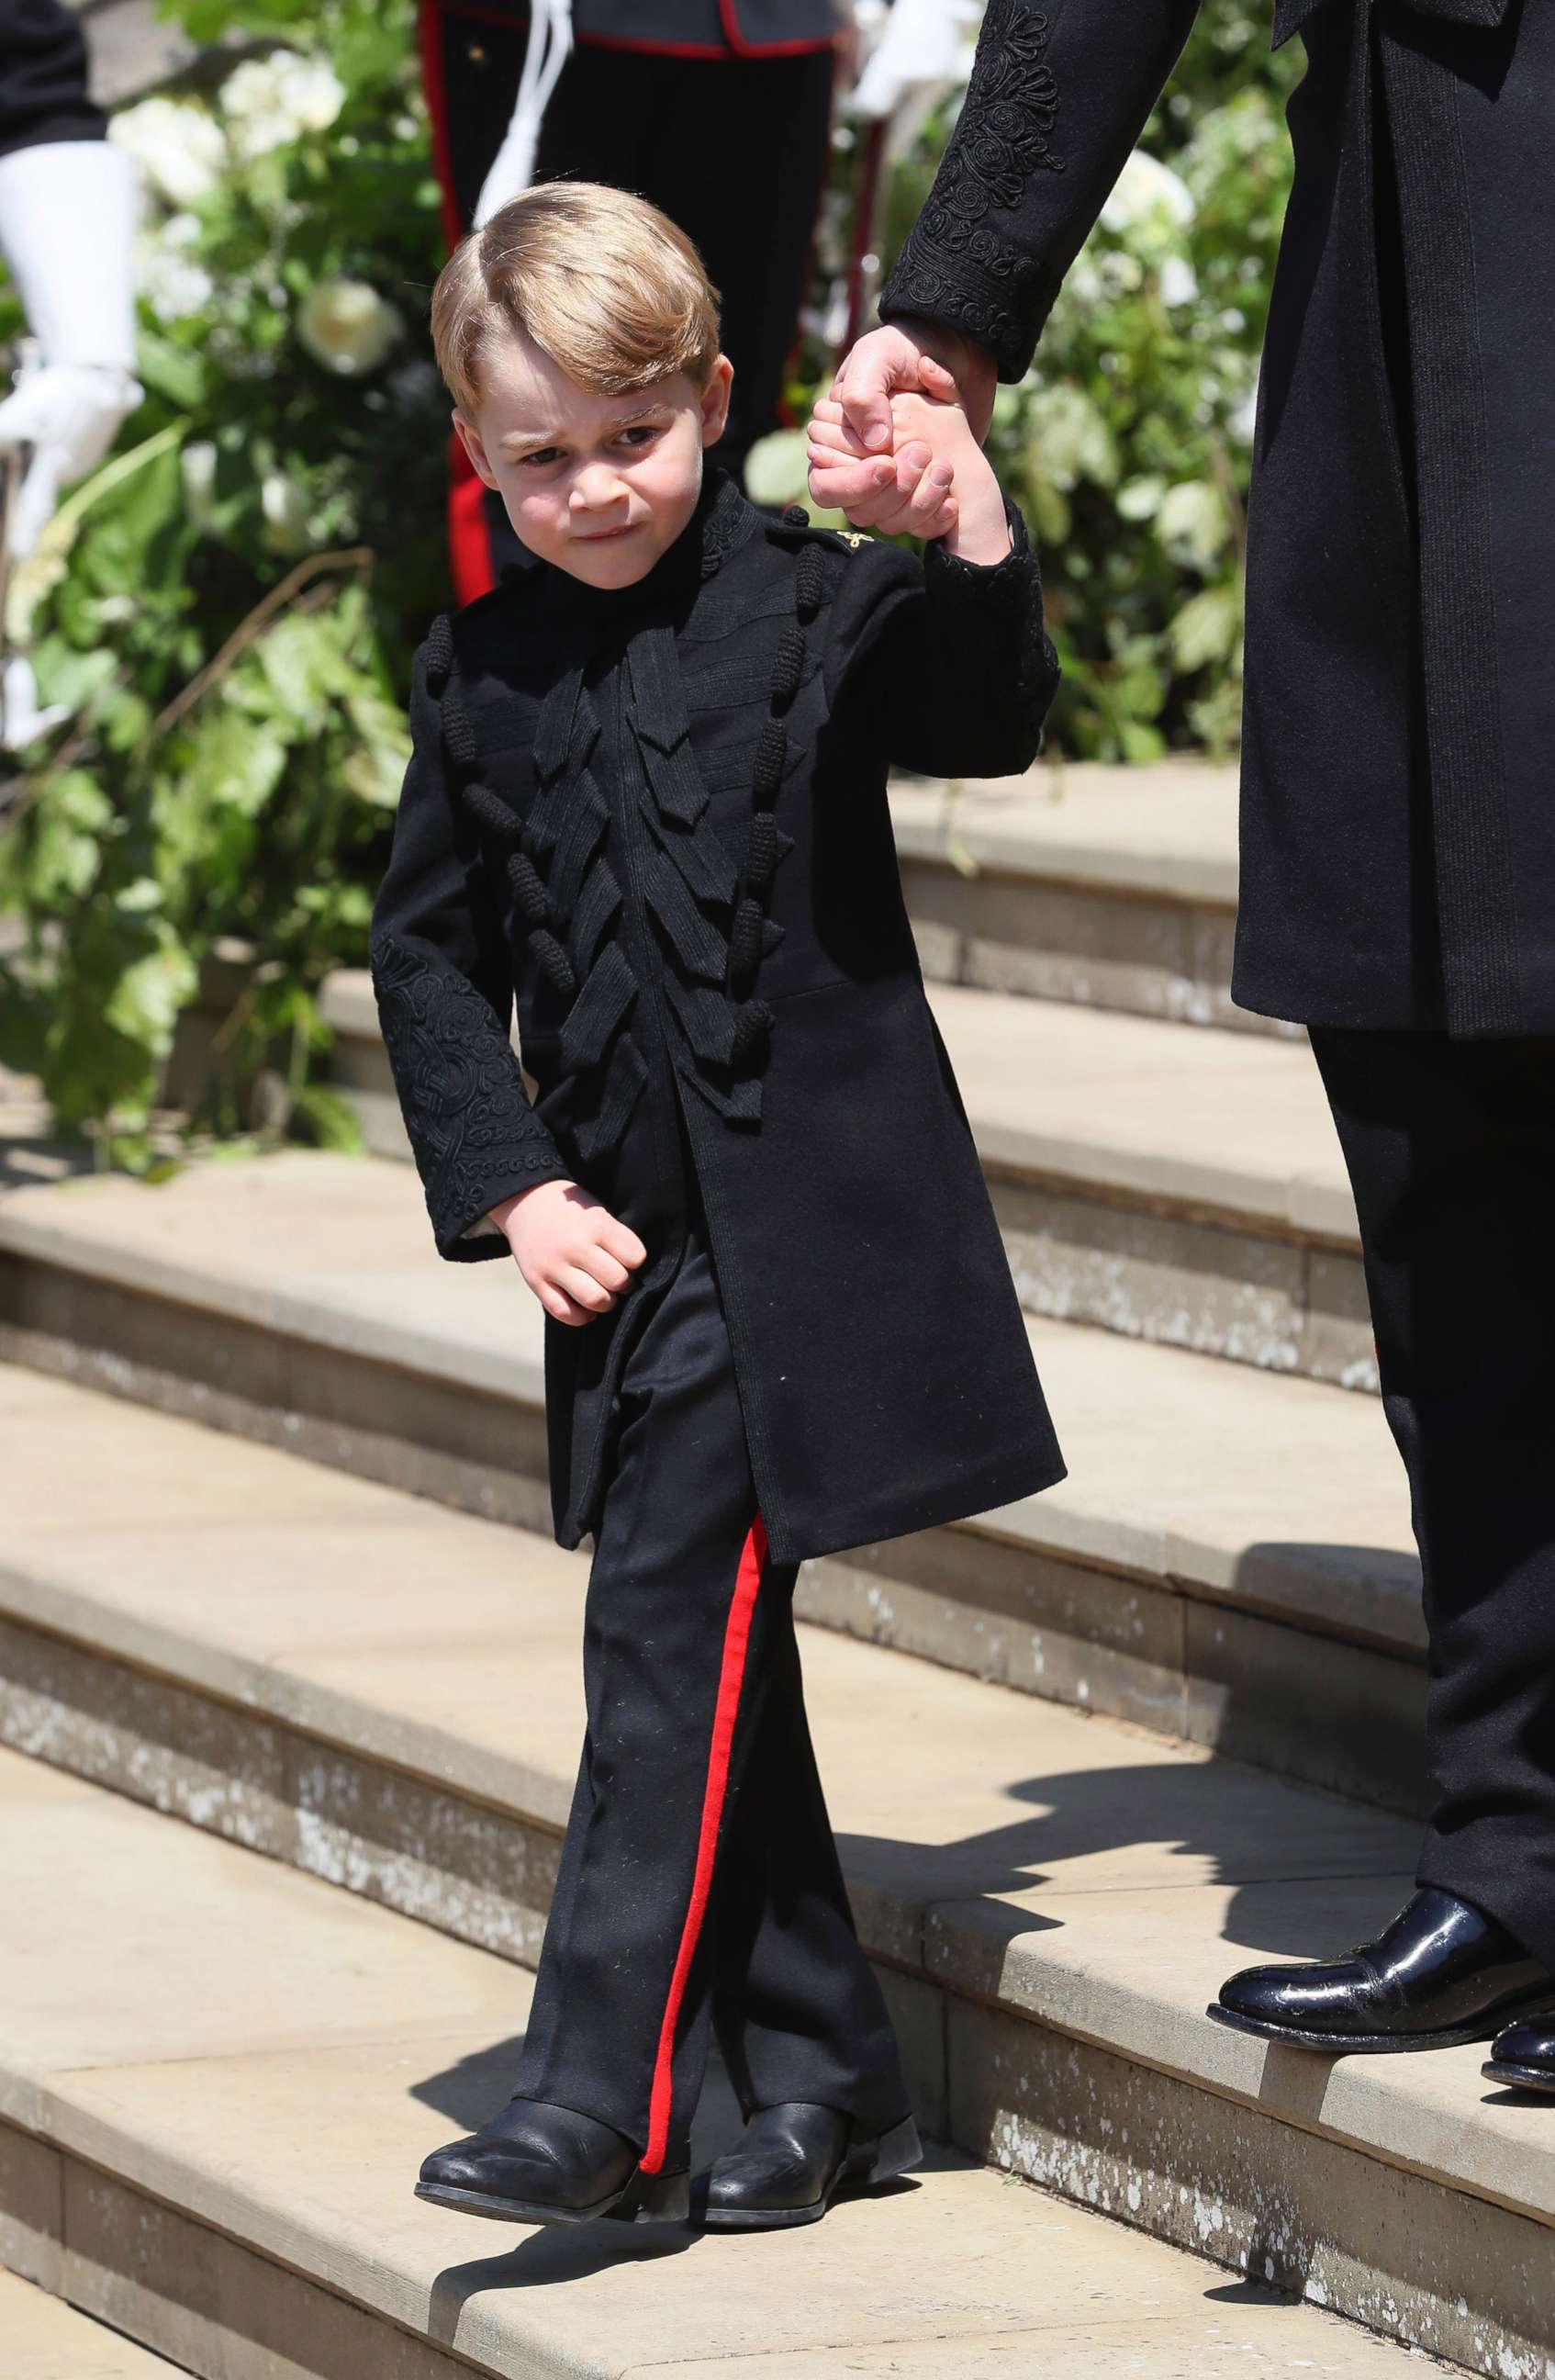 PHOTO: Britain's Prince George leaves after the wedding of Prince Harry and Meghan Markle at St. George's Chapel in Windsor Castle in Windsor, May 19, 2018.